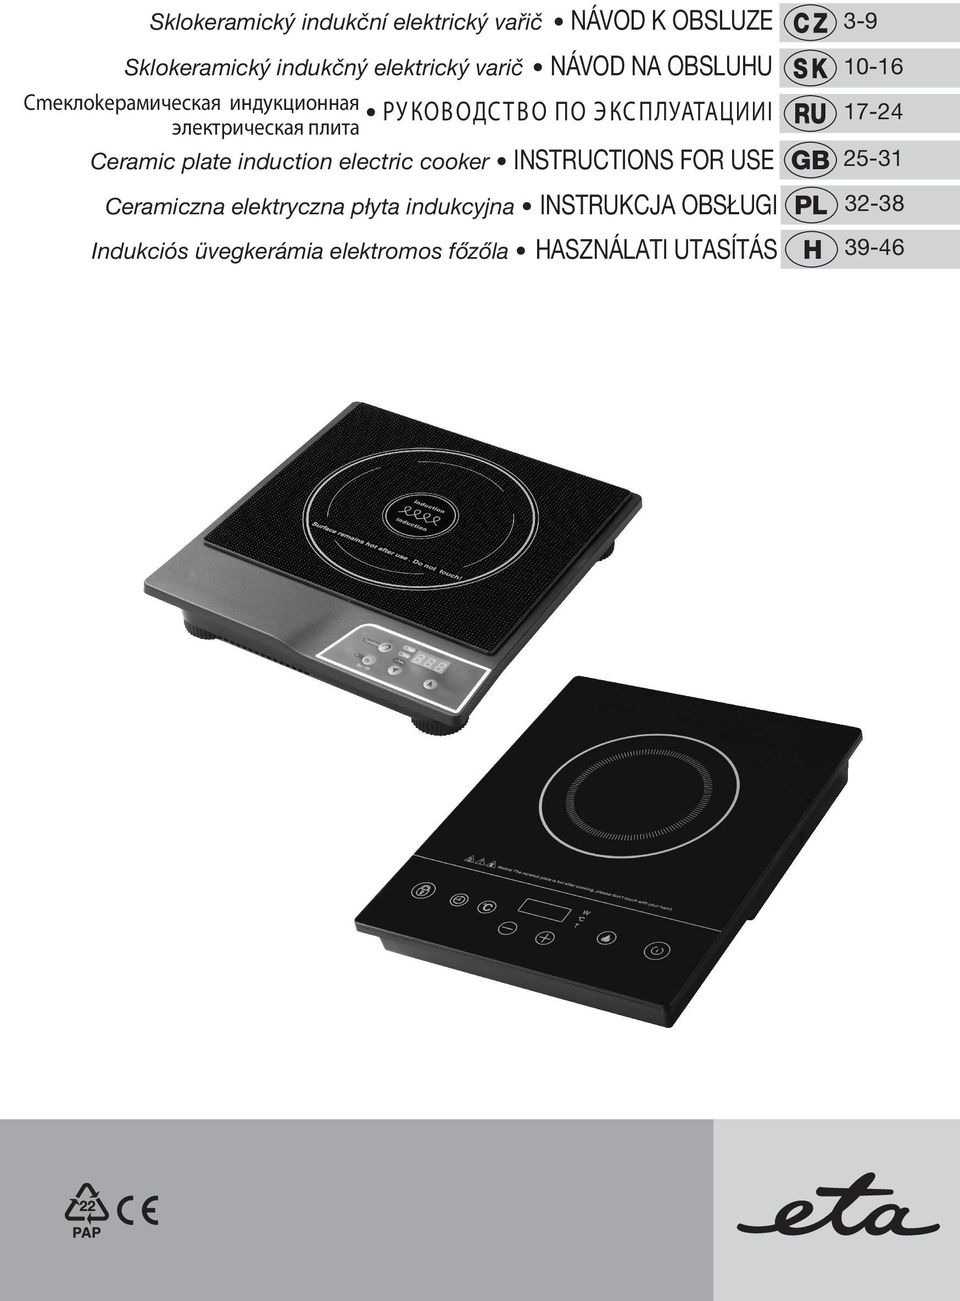 17-24 Ceramic plate induction electric cooker INSTRUCTIONS FOR USE GB 25-31 Ceramiczna elektryczna p³yta